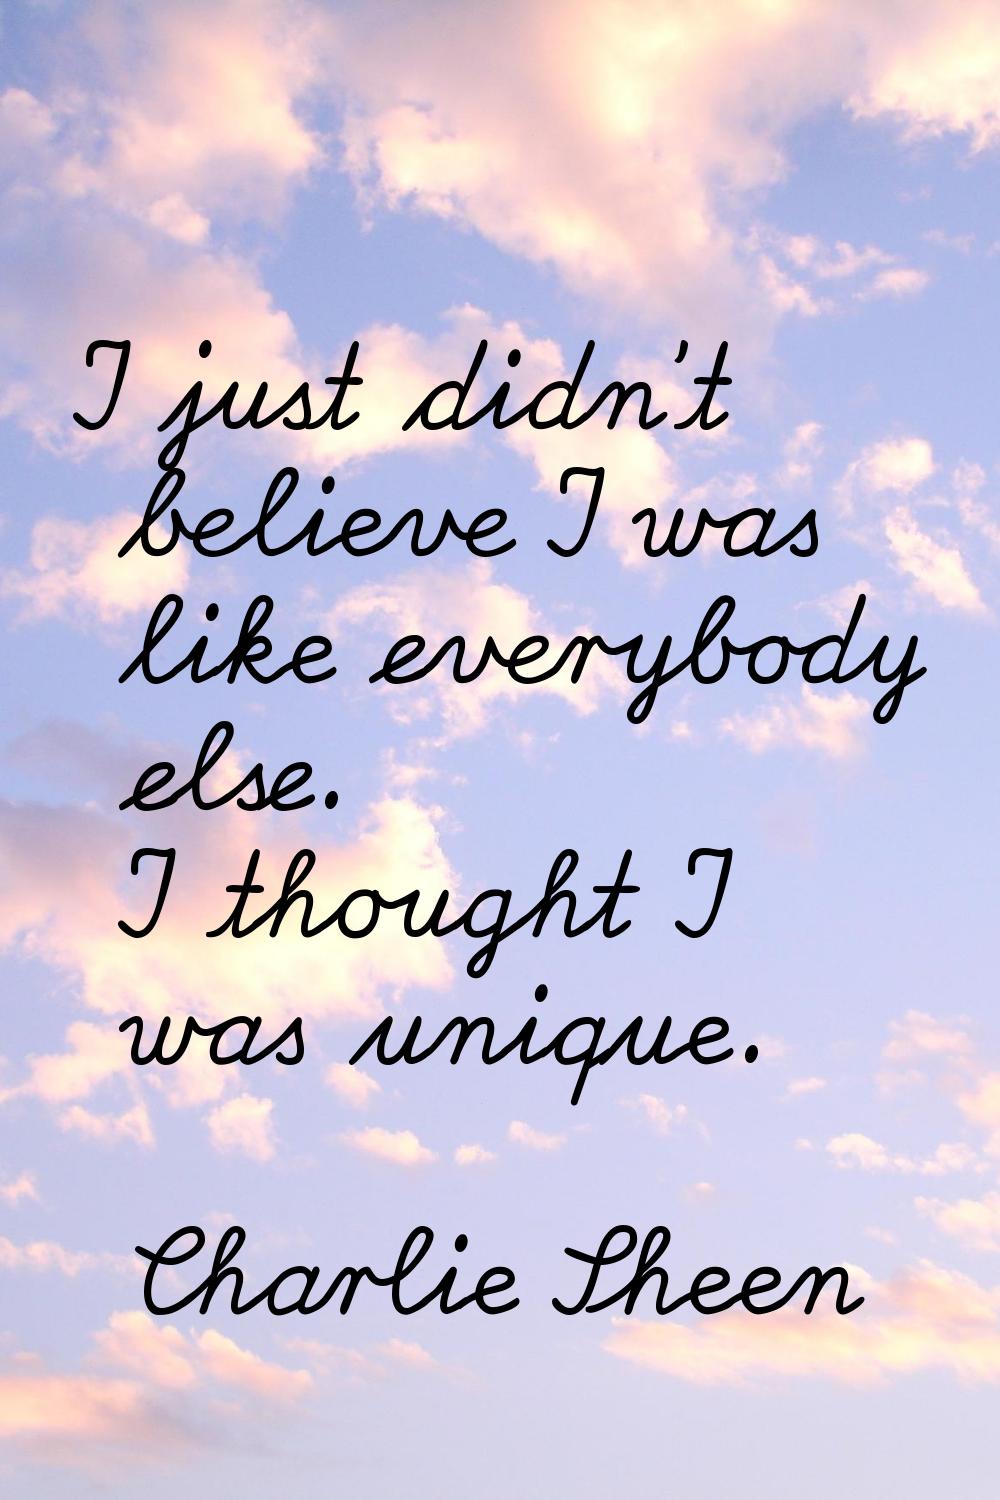 I just didn't believe I was like everybody else. I thought I was unique.